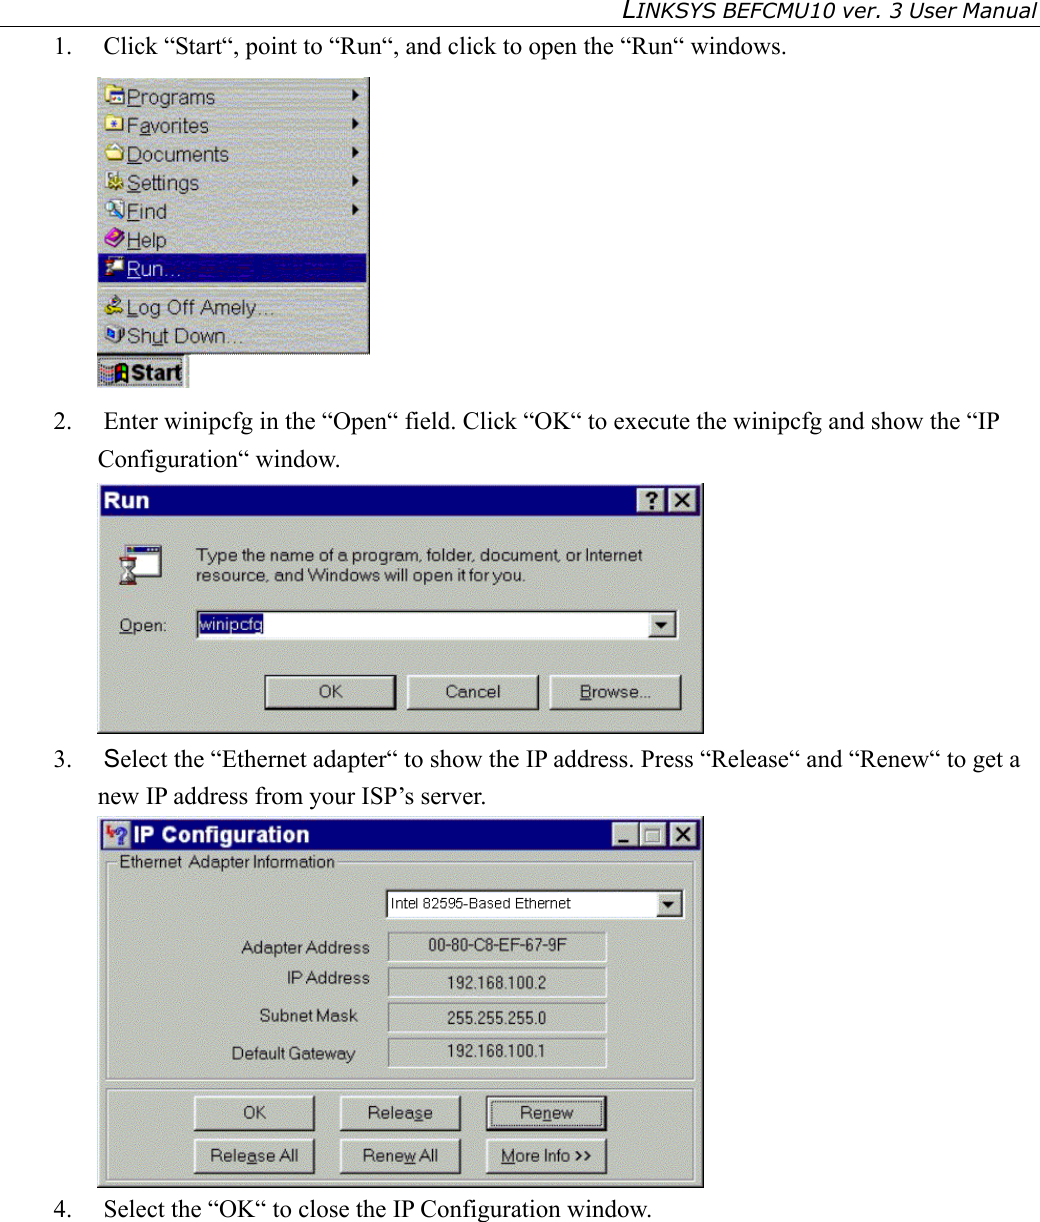 LINKSYS BEFCMU10 ver. 3 User Manual   1. Click “Start“, point to “Run“, and click to open the “Run“ windows.  2.  Enter winipcfg in the “Open“ field. Click “OK“ to execute the winipcfg and show the “IP Configuration“ window.  3.  Select the “Ethernet adapter“ to show the IP address. Press “Release“ and “Renew“ to get a new IP address from your ISP’s server.  4.  Select the “OK“ to close the IP Configuration window.        